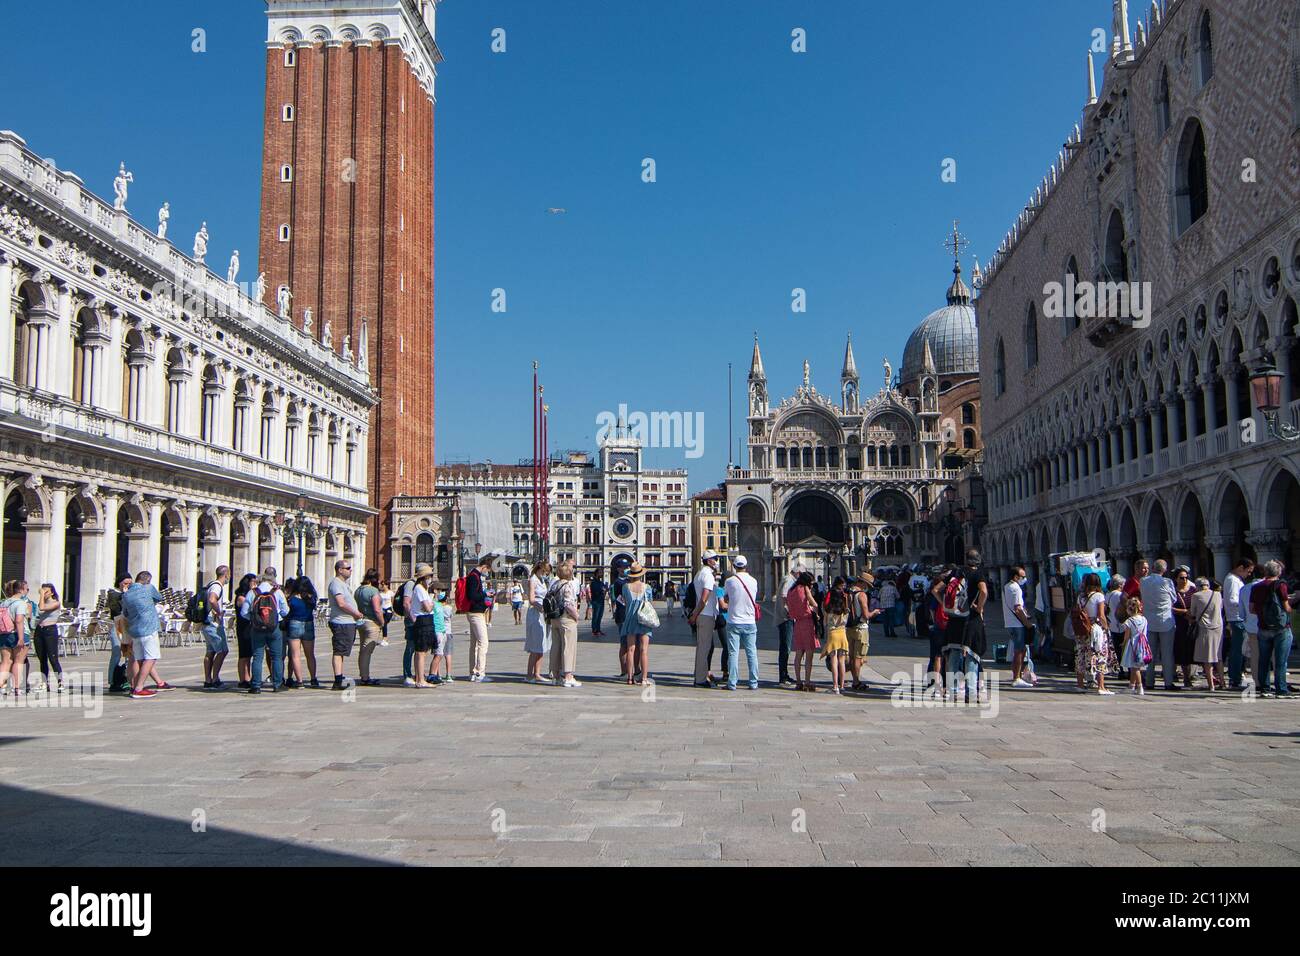 VENICE, ITALY - JUNE 13, 2020: Tourists visit the Ducale Palace Museum the day of the reopening after more than 3 months of closure due to the lockdown for Covid-19 on June 13, 2020 in Venice, Italy. Stock Photo